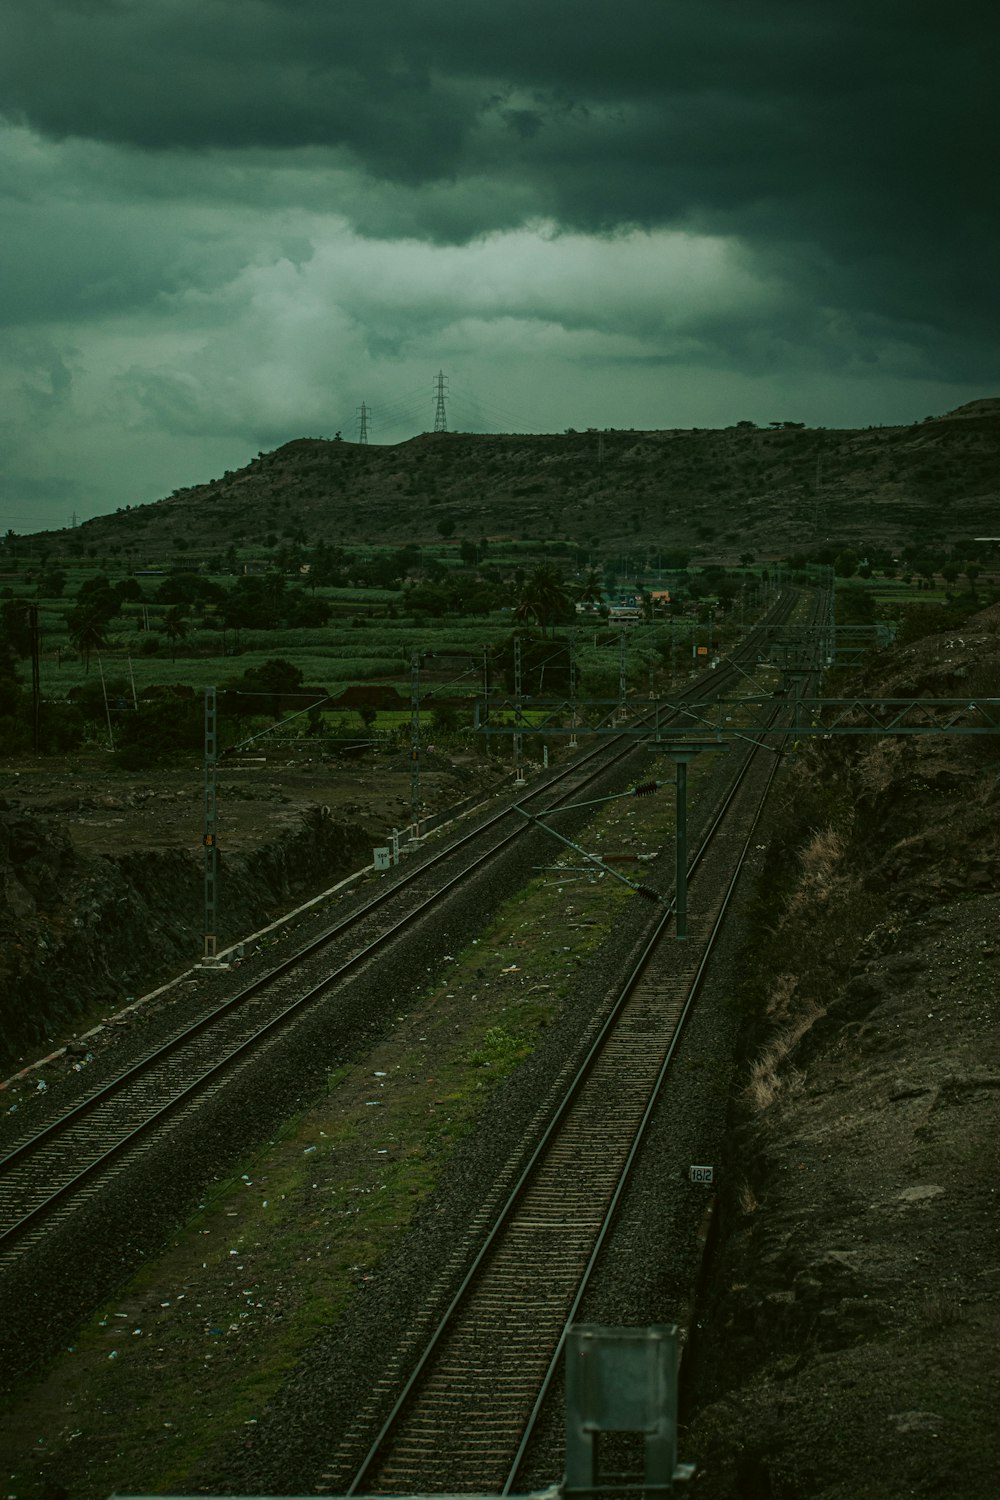 a train traveling down tracks under a cloudy sky